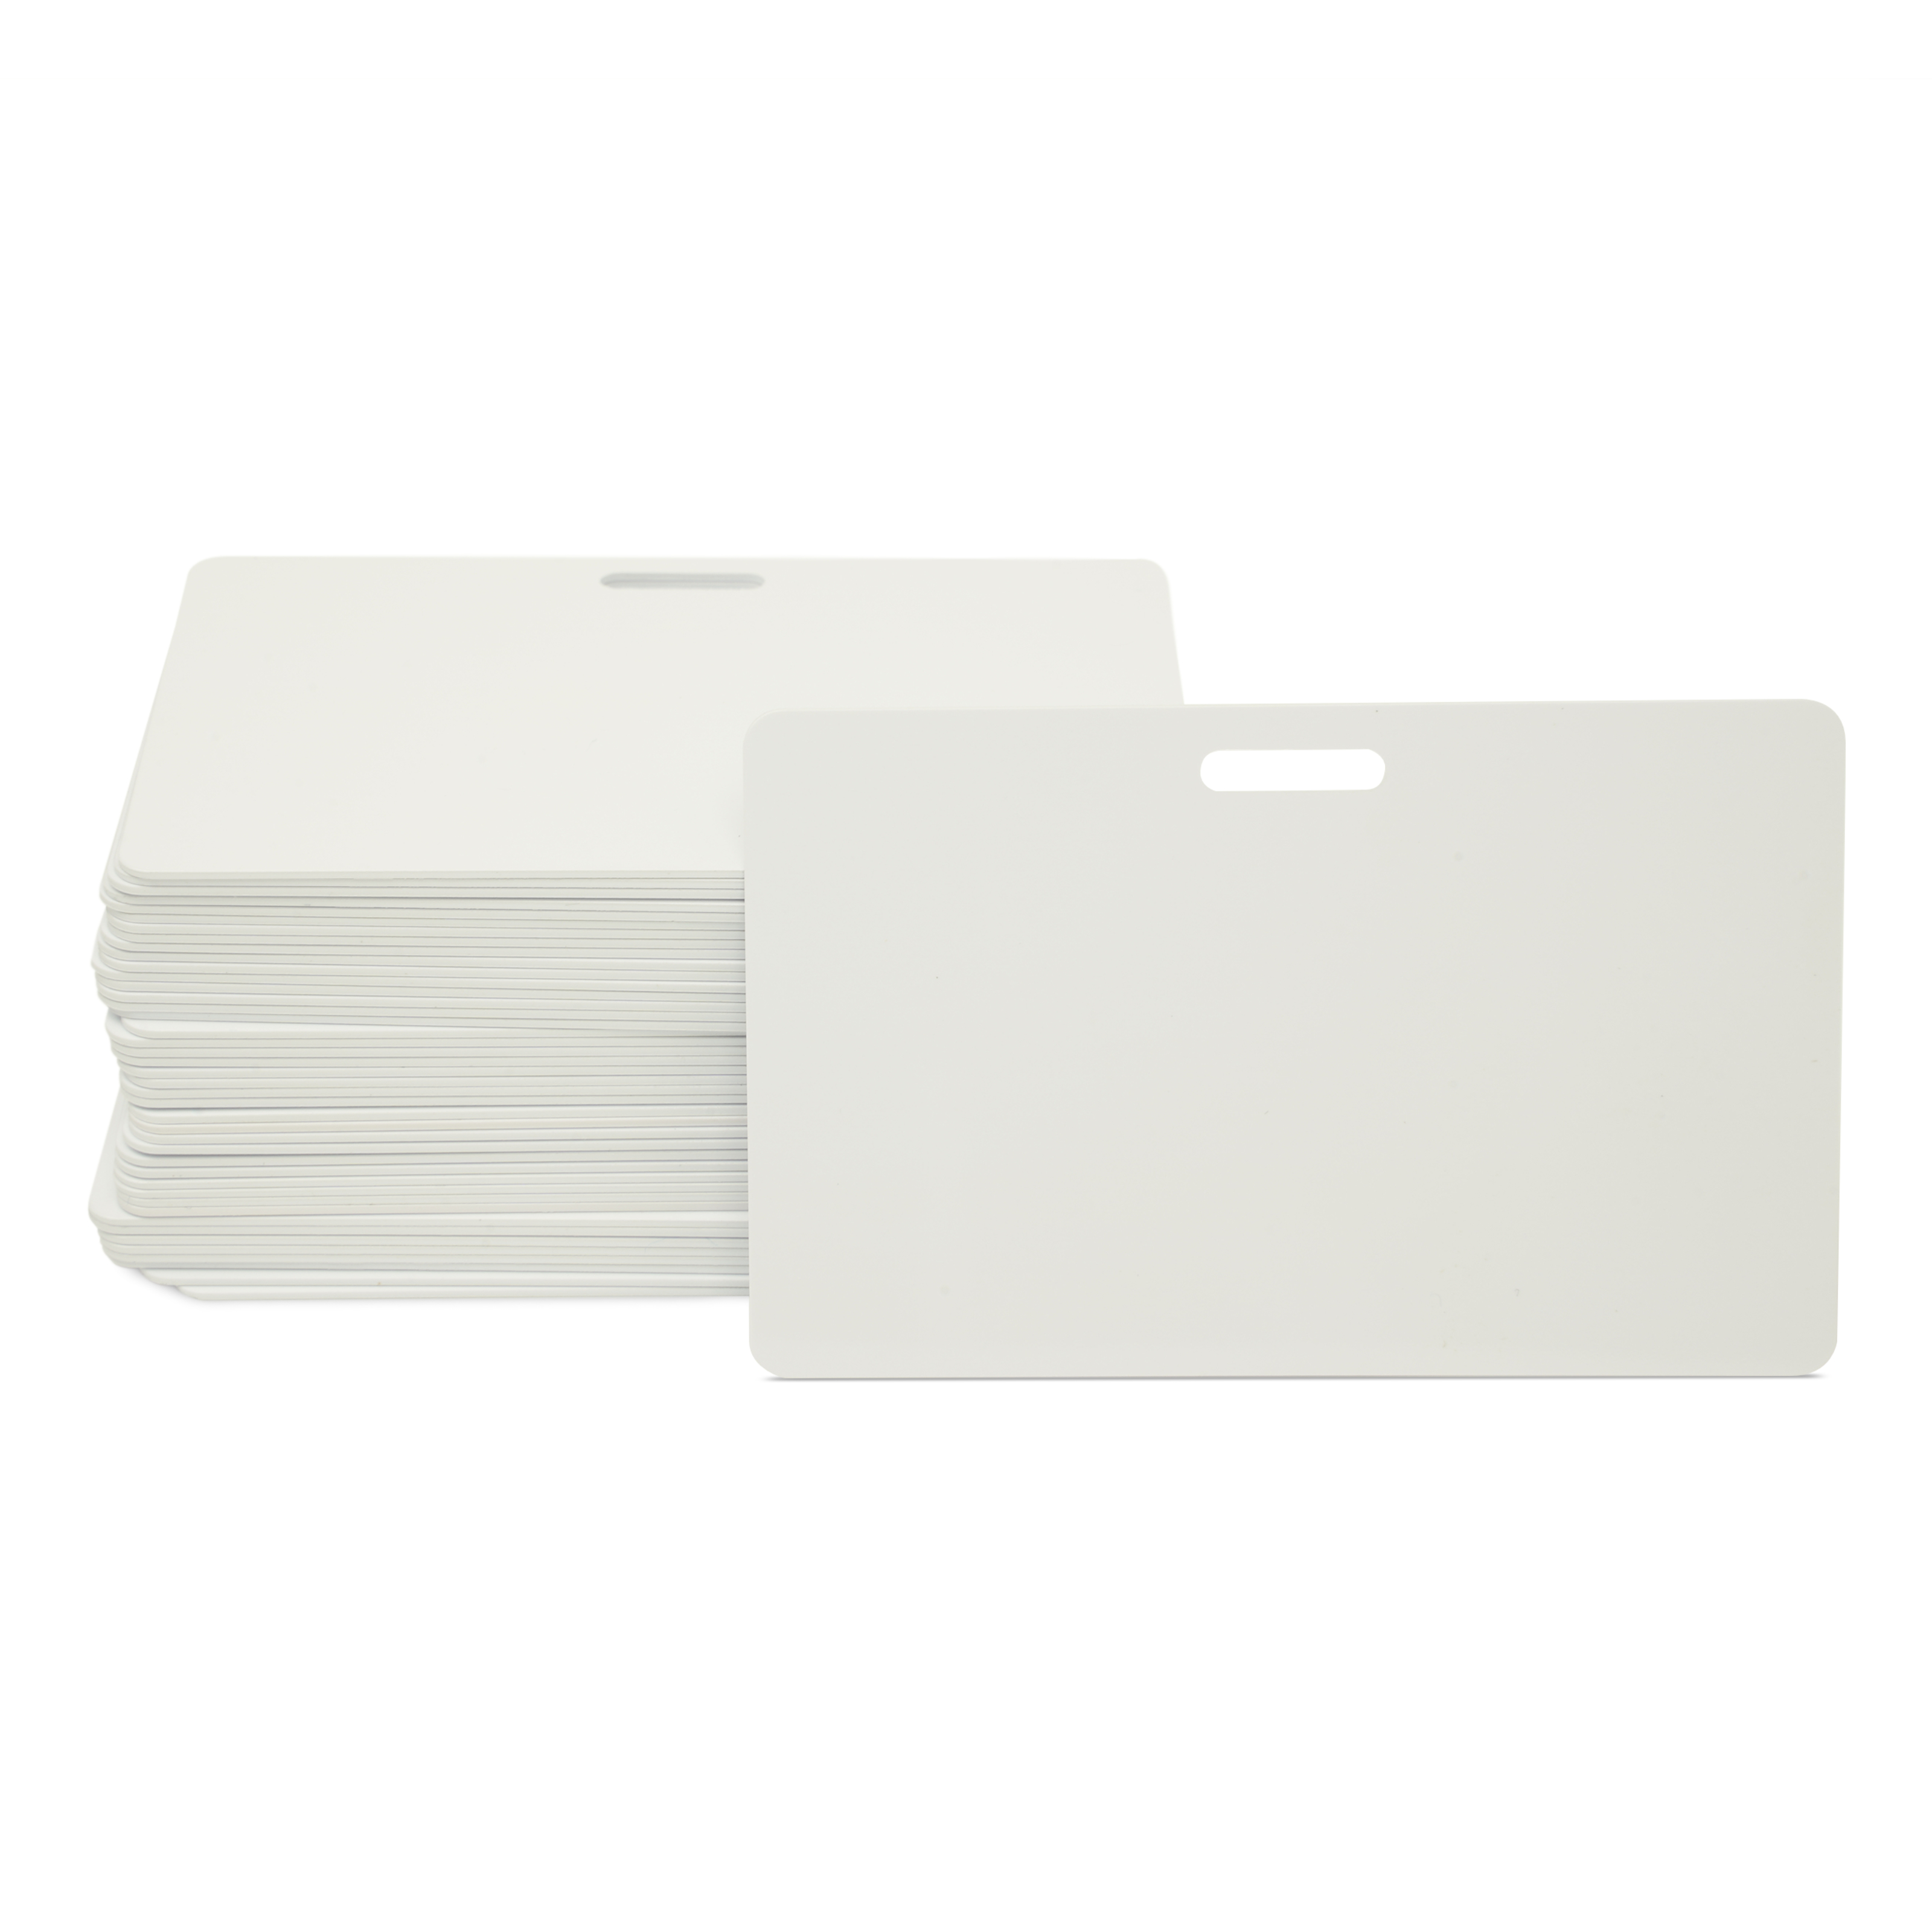 NFC Card PVC - 85,6 x 54 mm - NTAG213 - 180 Byte - white - landscape with slot